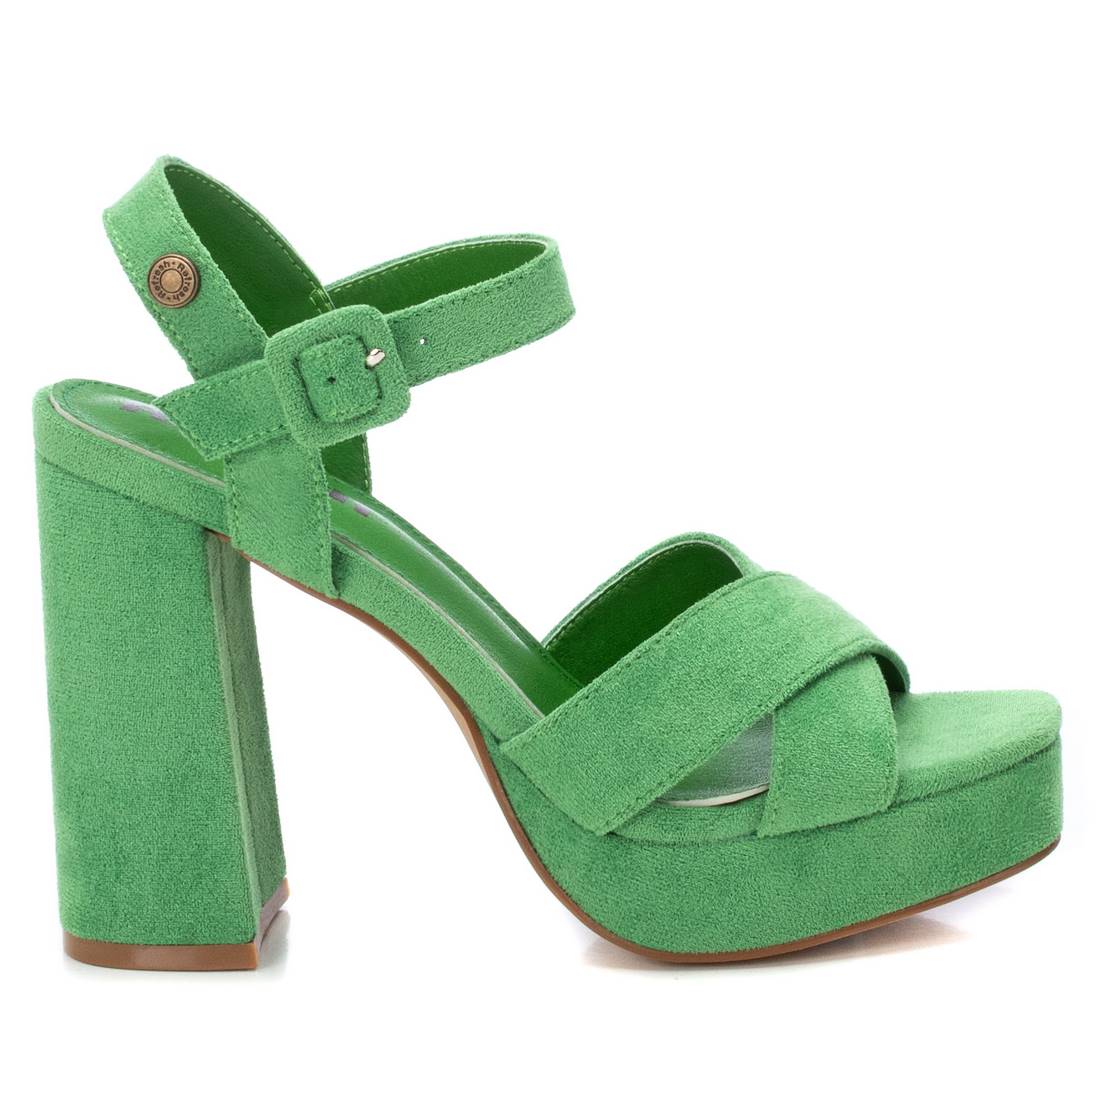 Women's Suede Dressy Sandals By Xti 170787